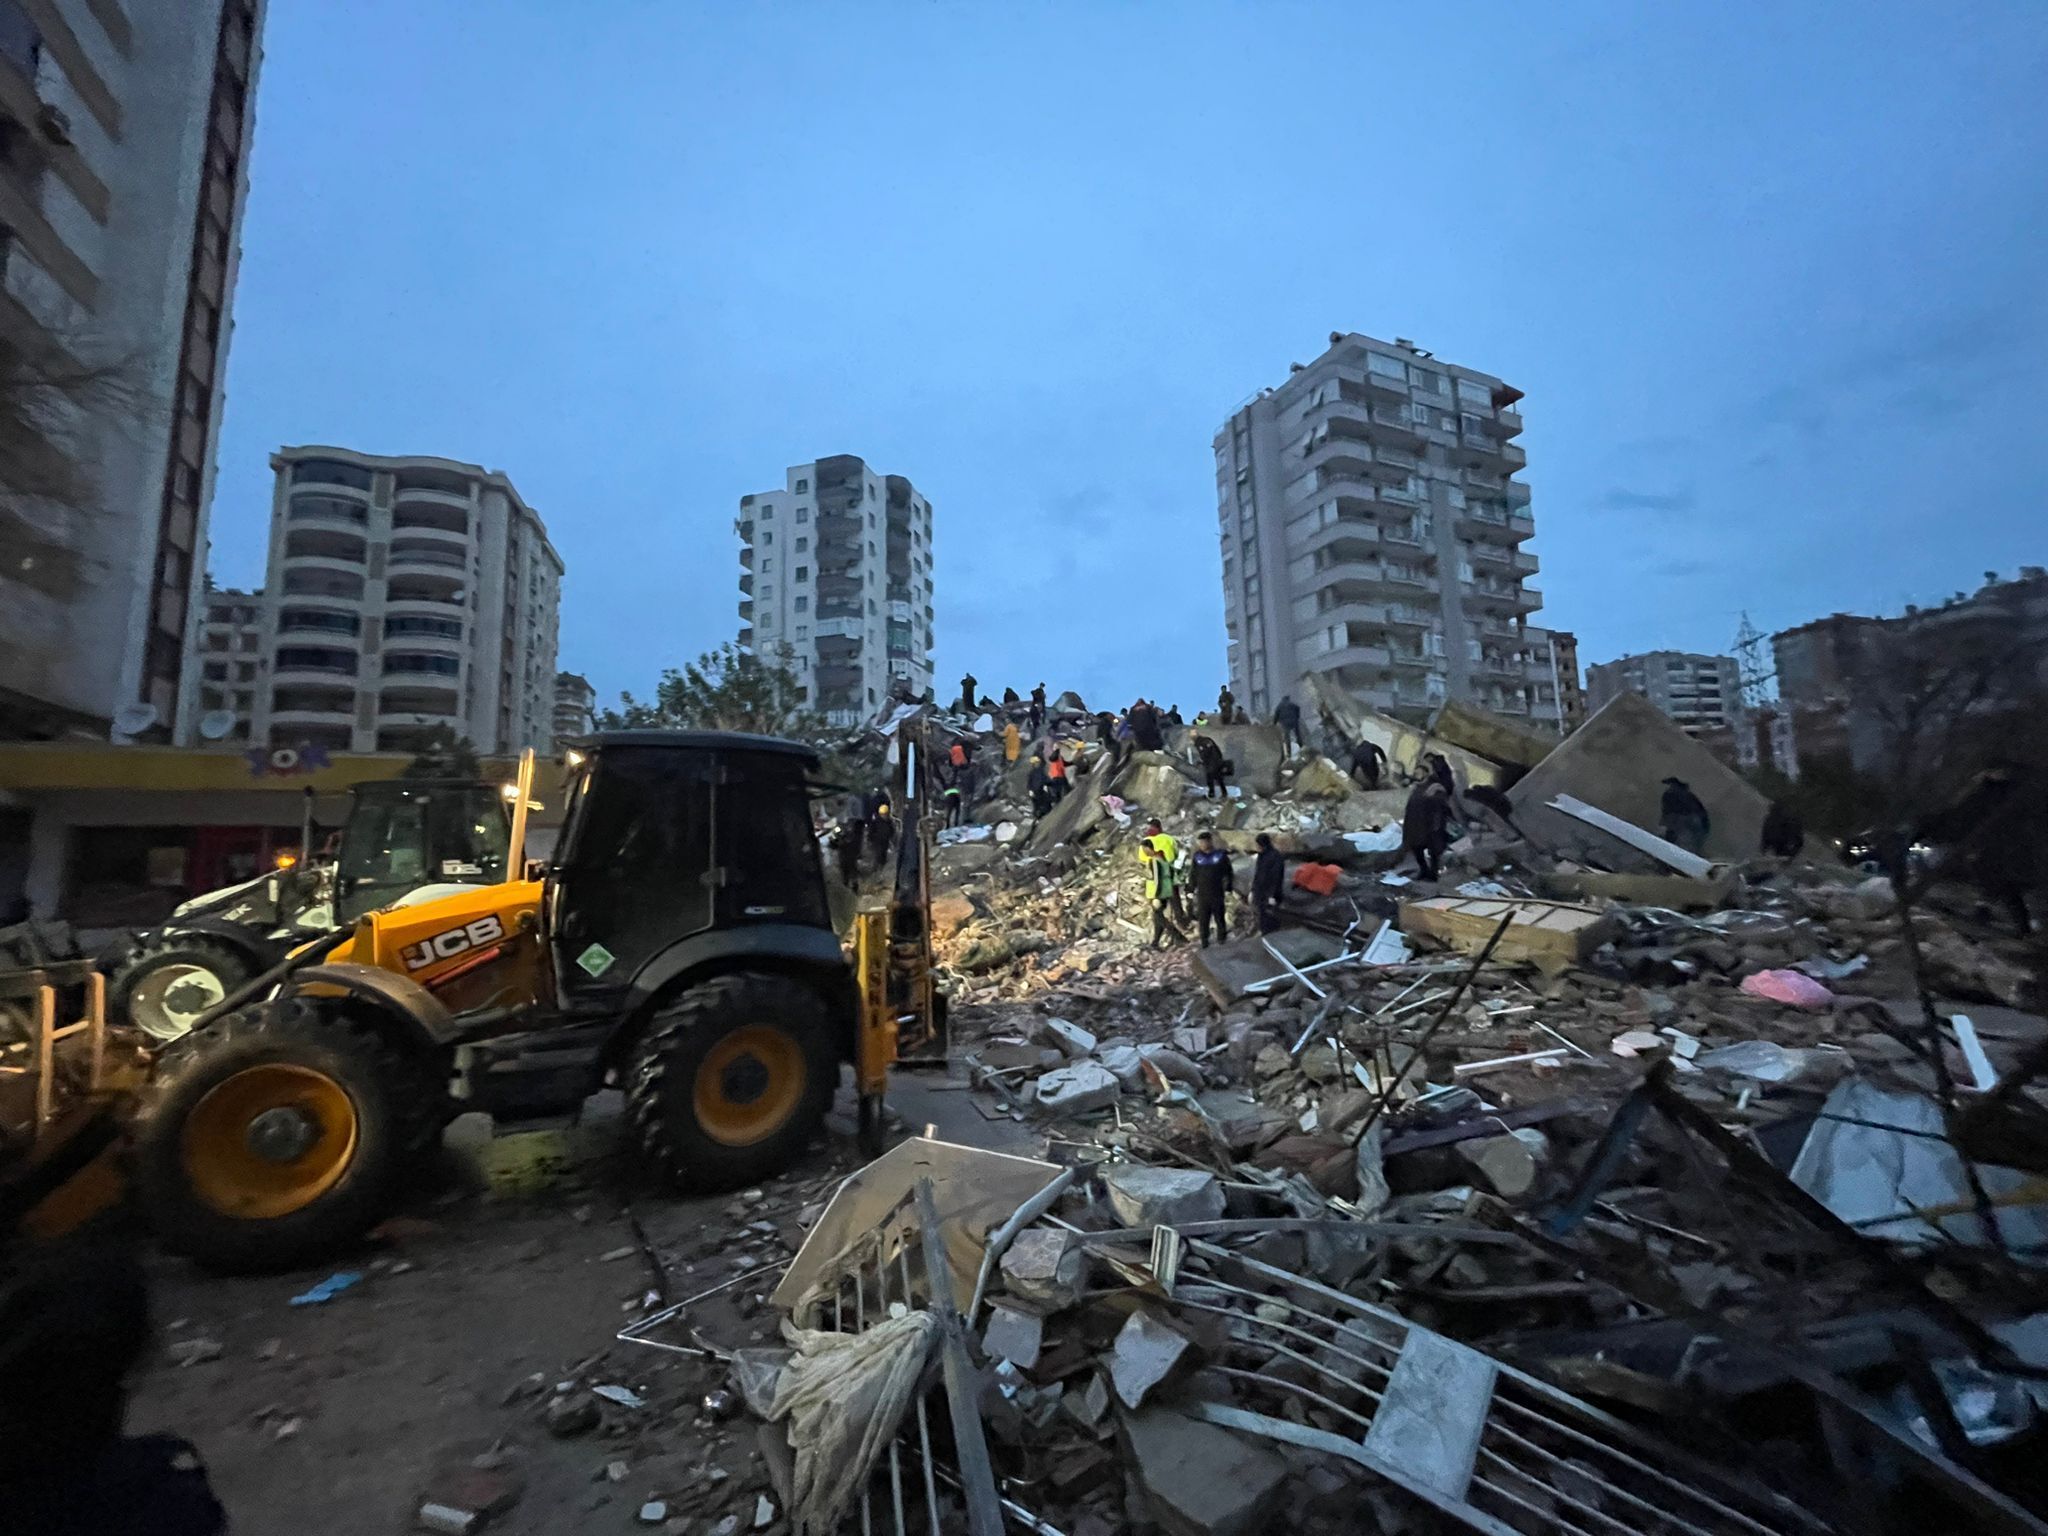 A  destroyed apartment and damaged vehicle in Yurt neighborhood of Cukurova district after the earthquake on February 6, 2023 in Adana, Turkiye.